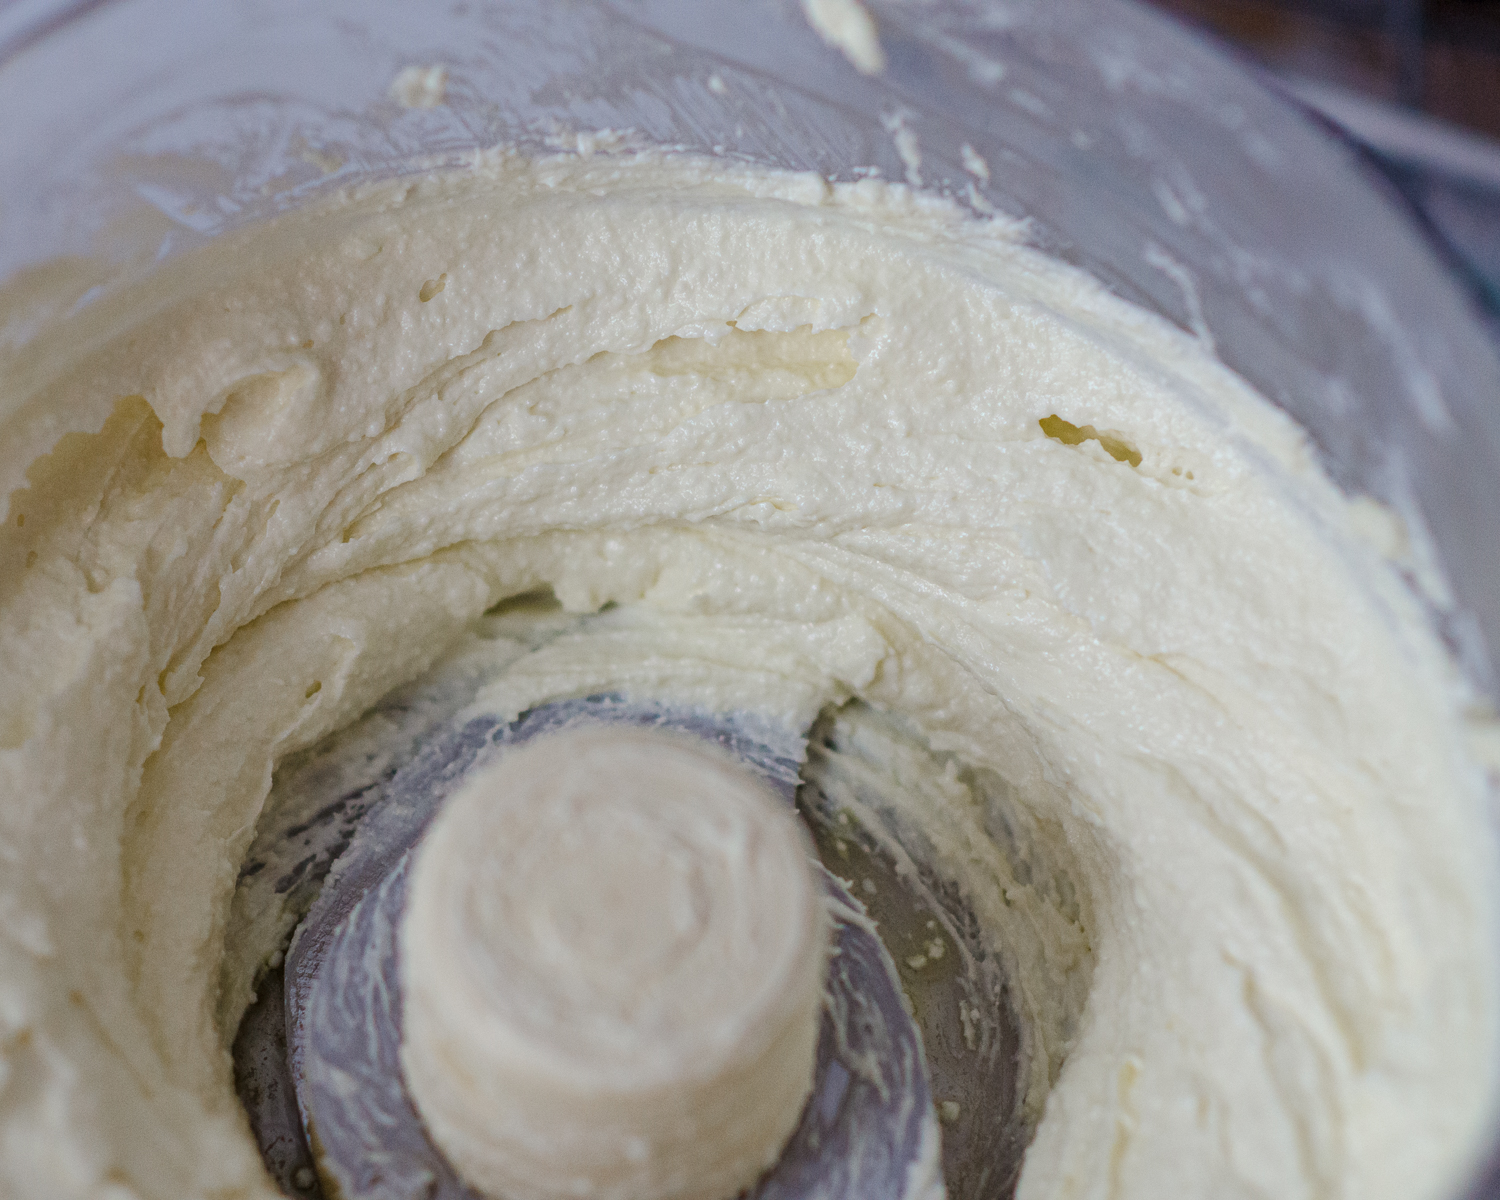 Creamy swirls of the whipped feta spread in the food processor bowl. 